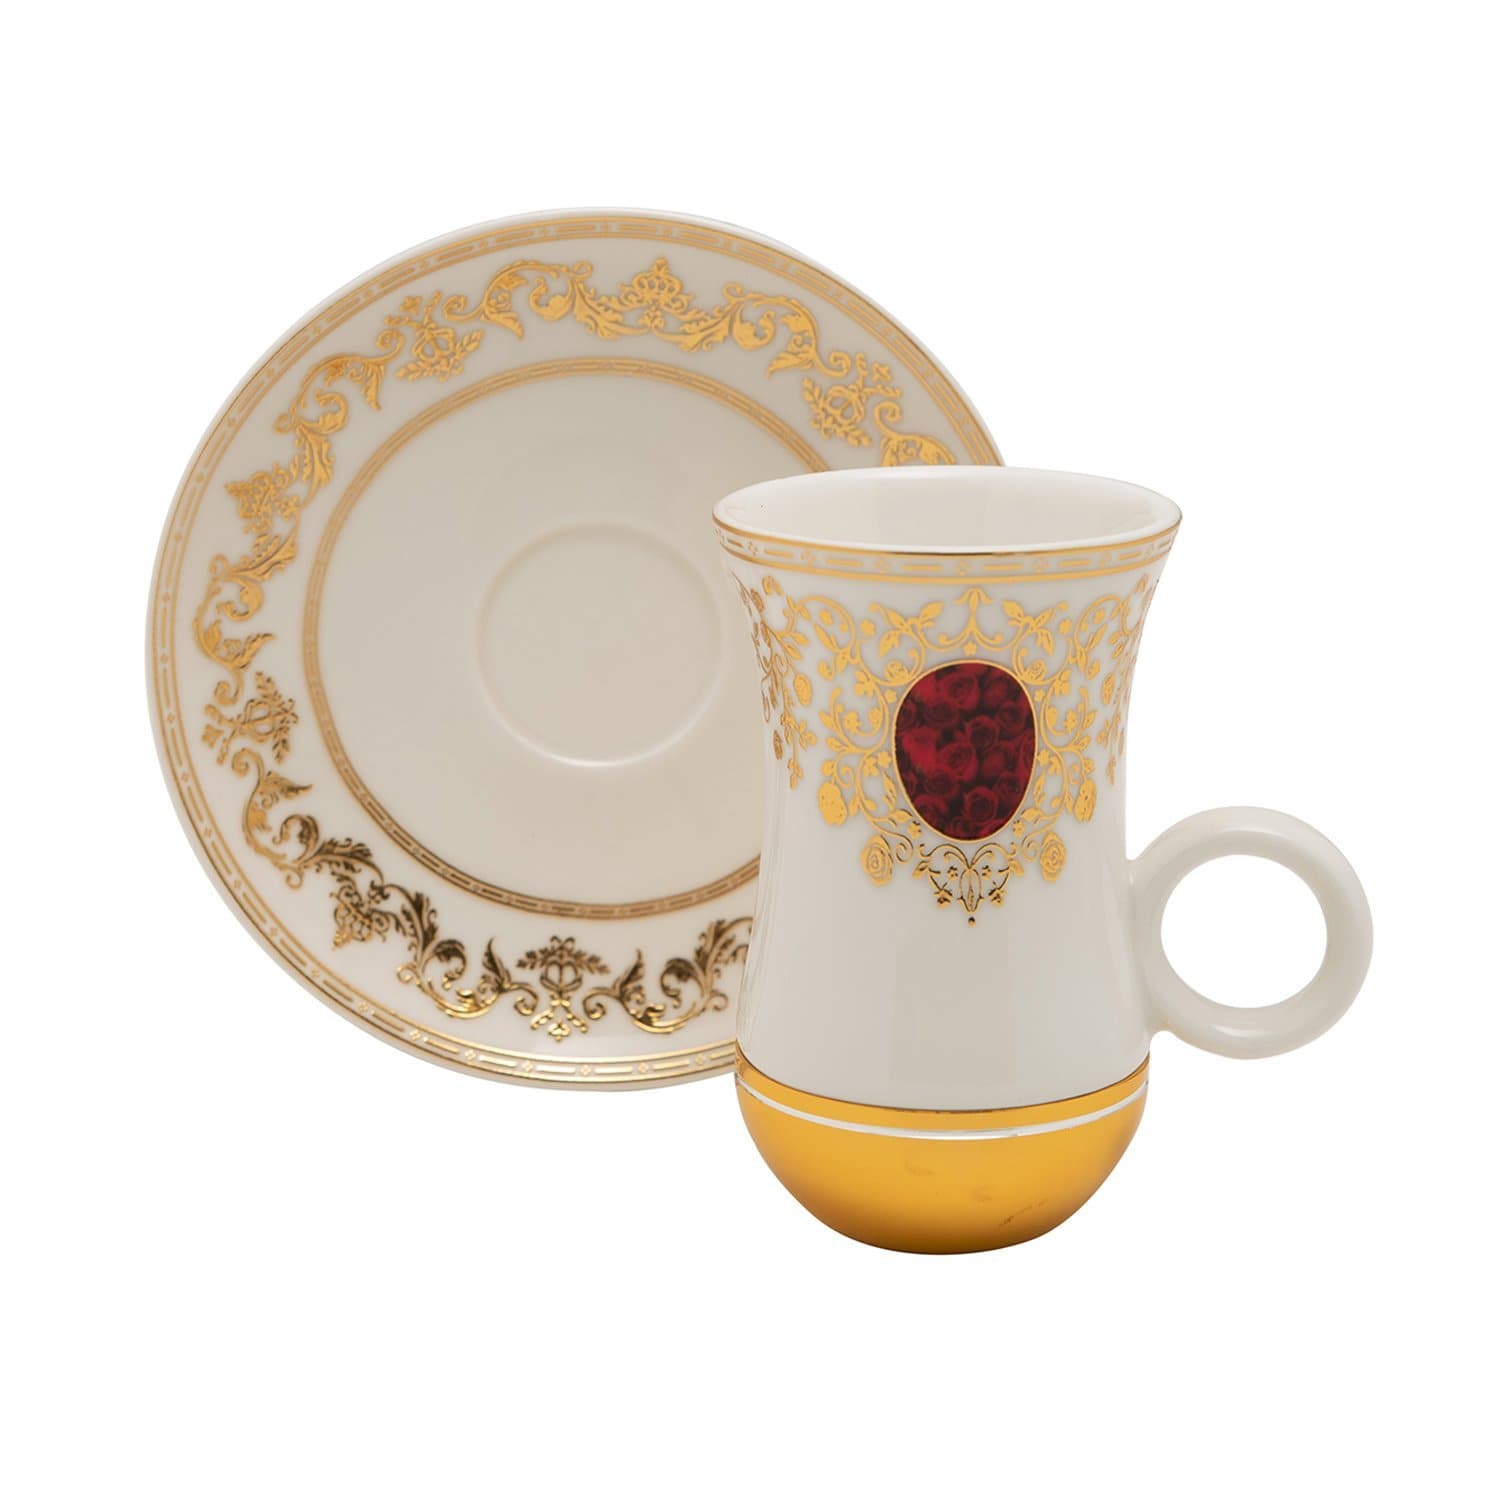 MARJANI RED GOLD 12PC SET ISTIKAN CUP AND SAUCER - AM3373-S28/028/12PC